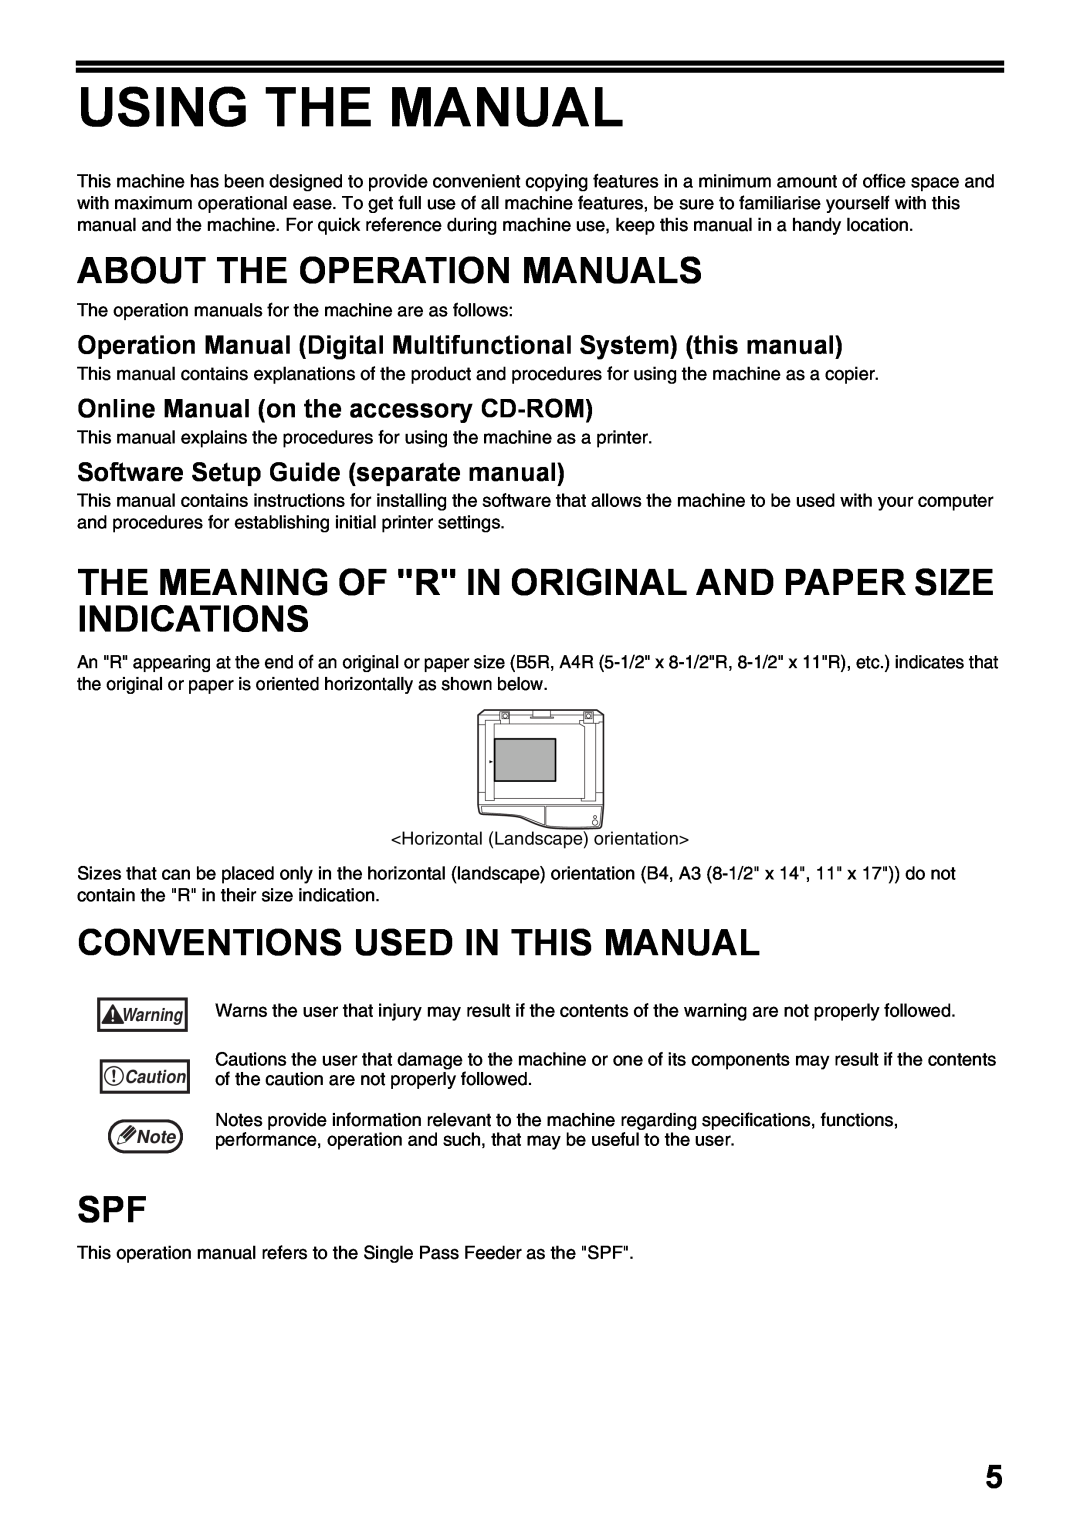 Olivetti 20W, 16W Using The Manual, About The Operation Manuals, The Meaning Of R In Original And Paper Size Indications 